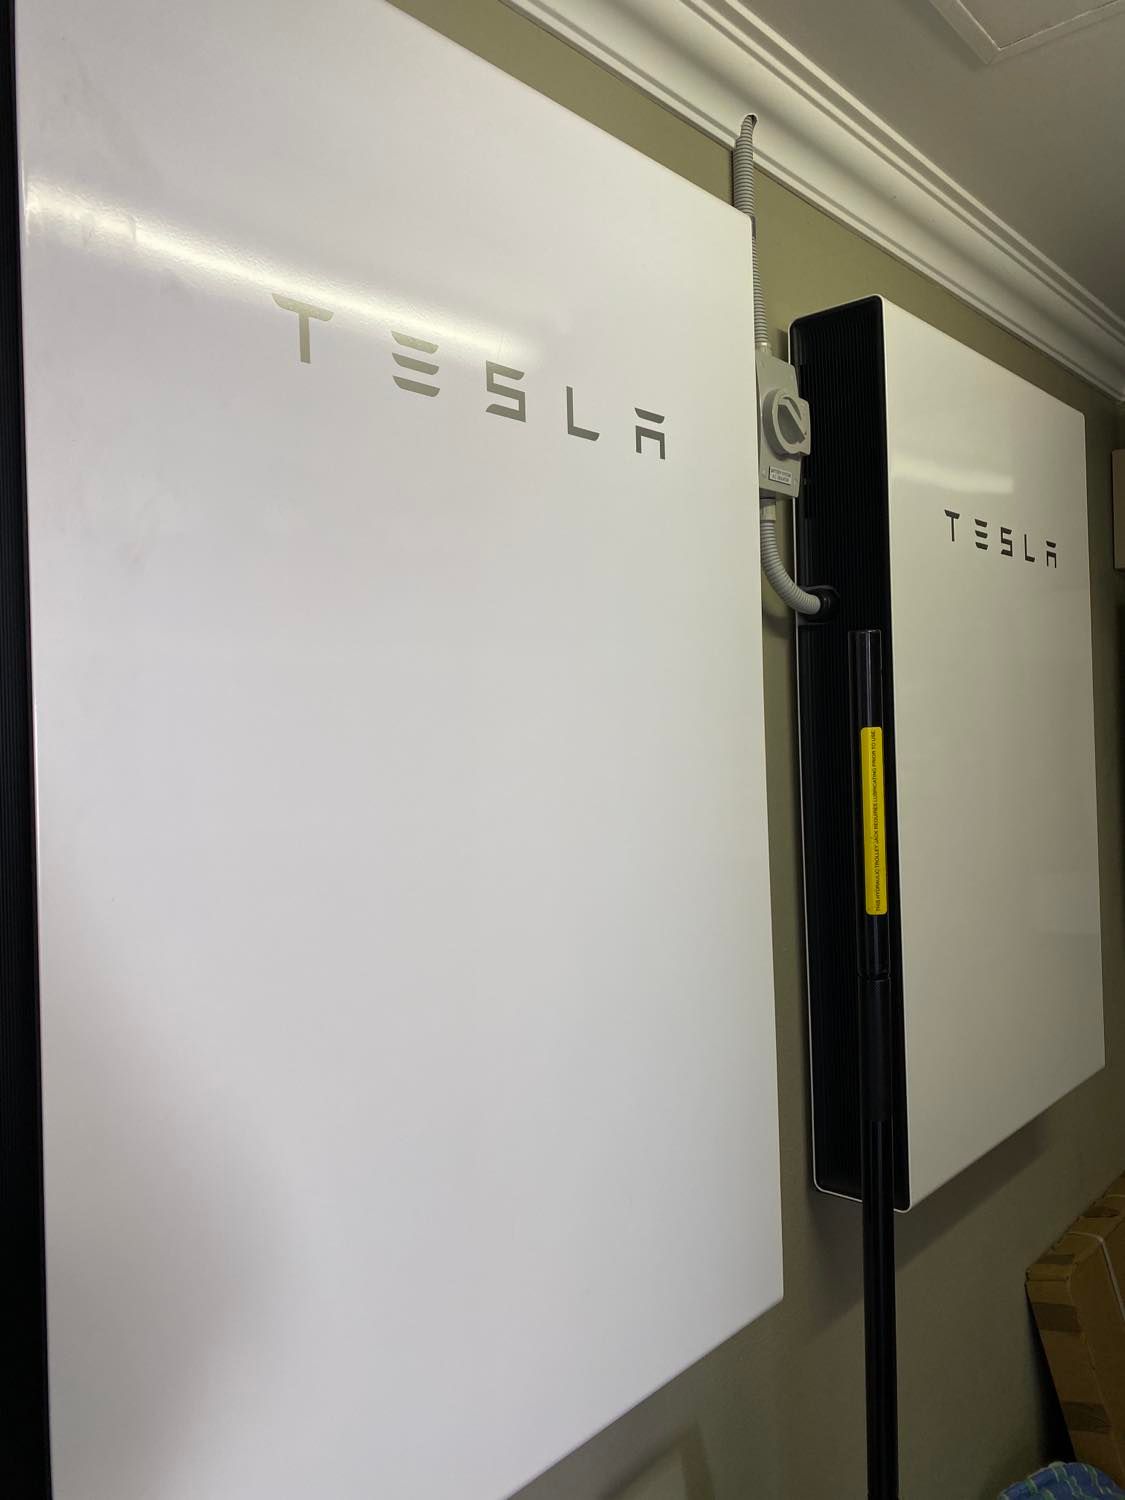 Batteries not included: The evolution of solar storage solutions